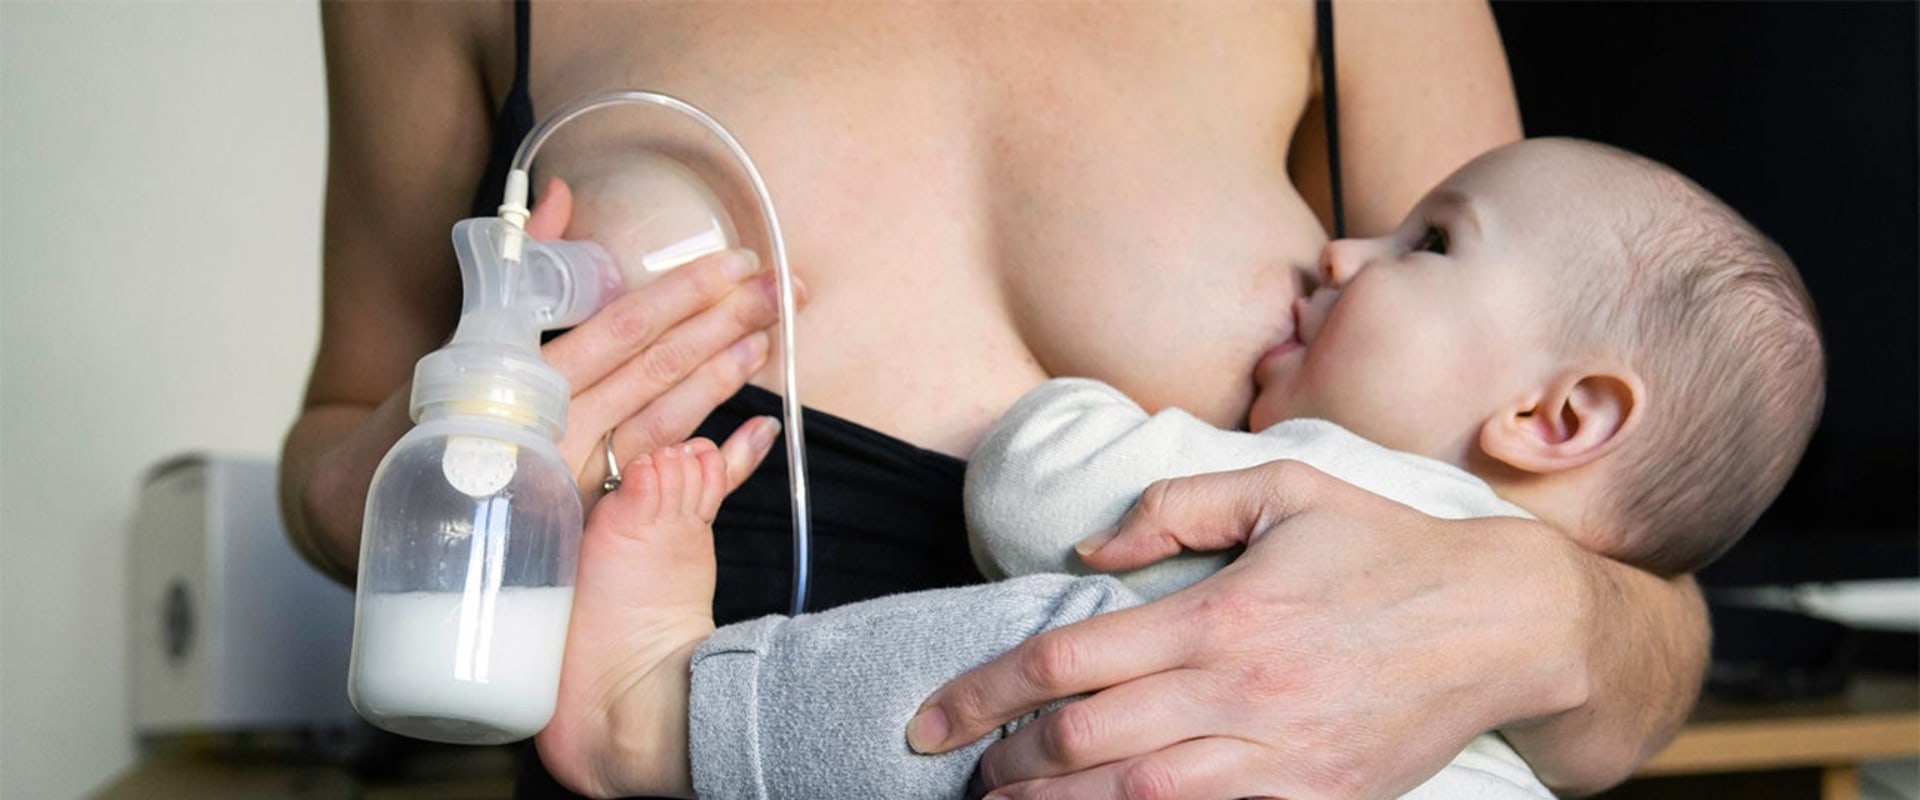 Can a Breast Pump Help You Lose Weight?